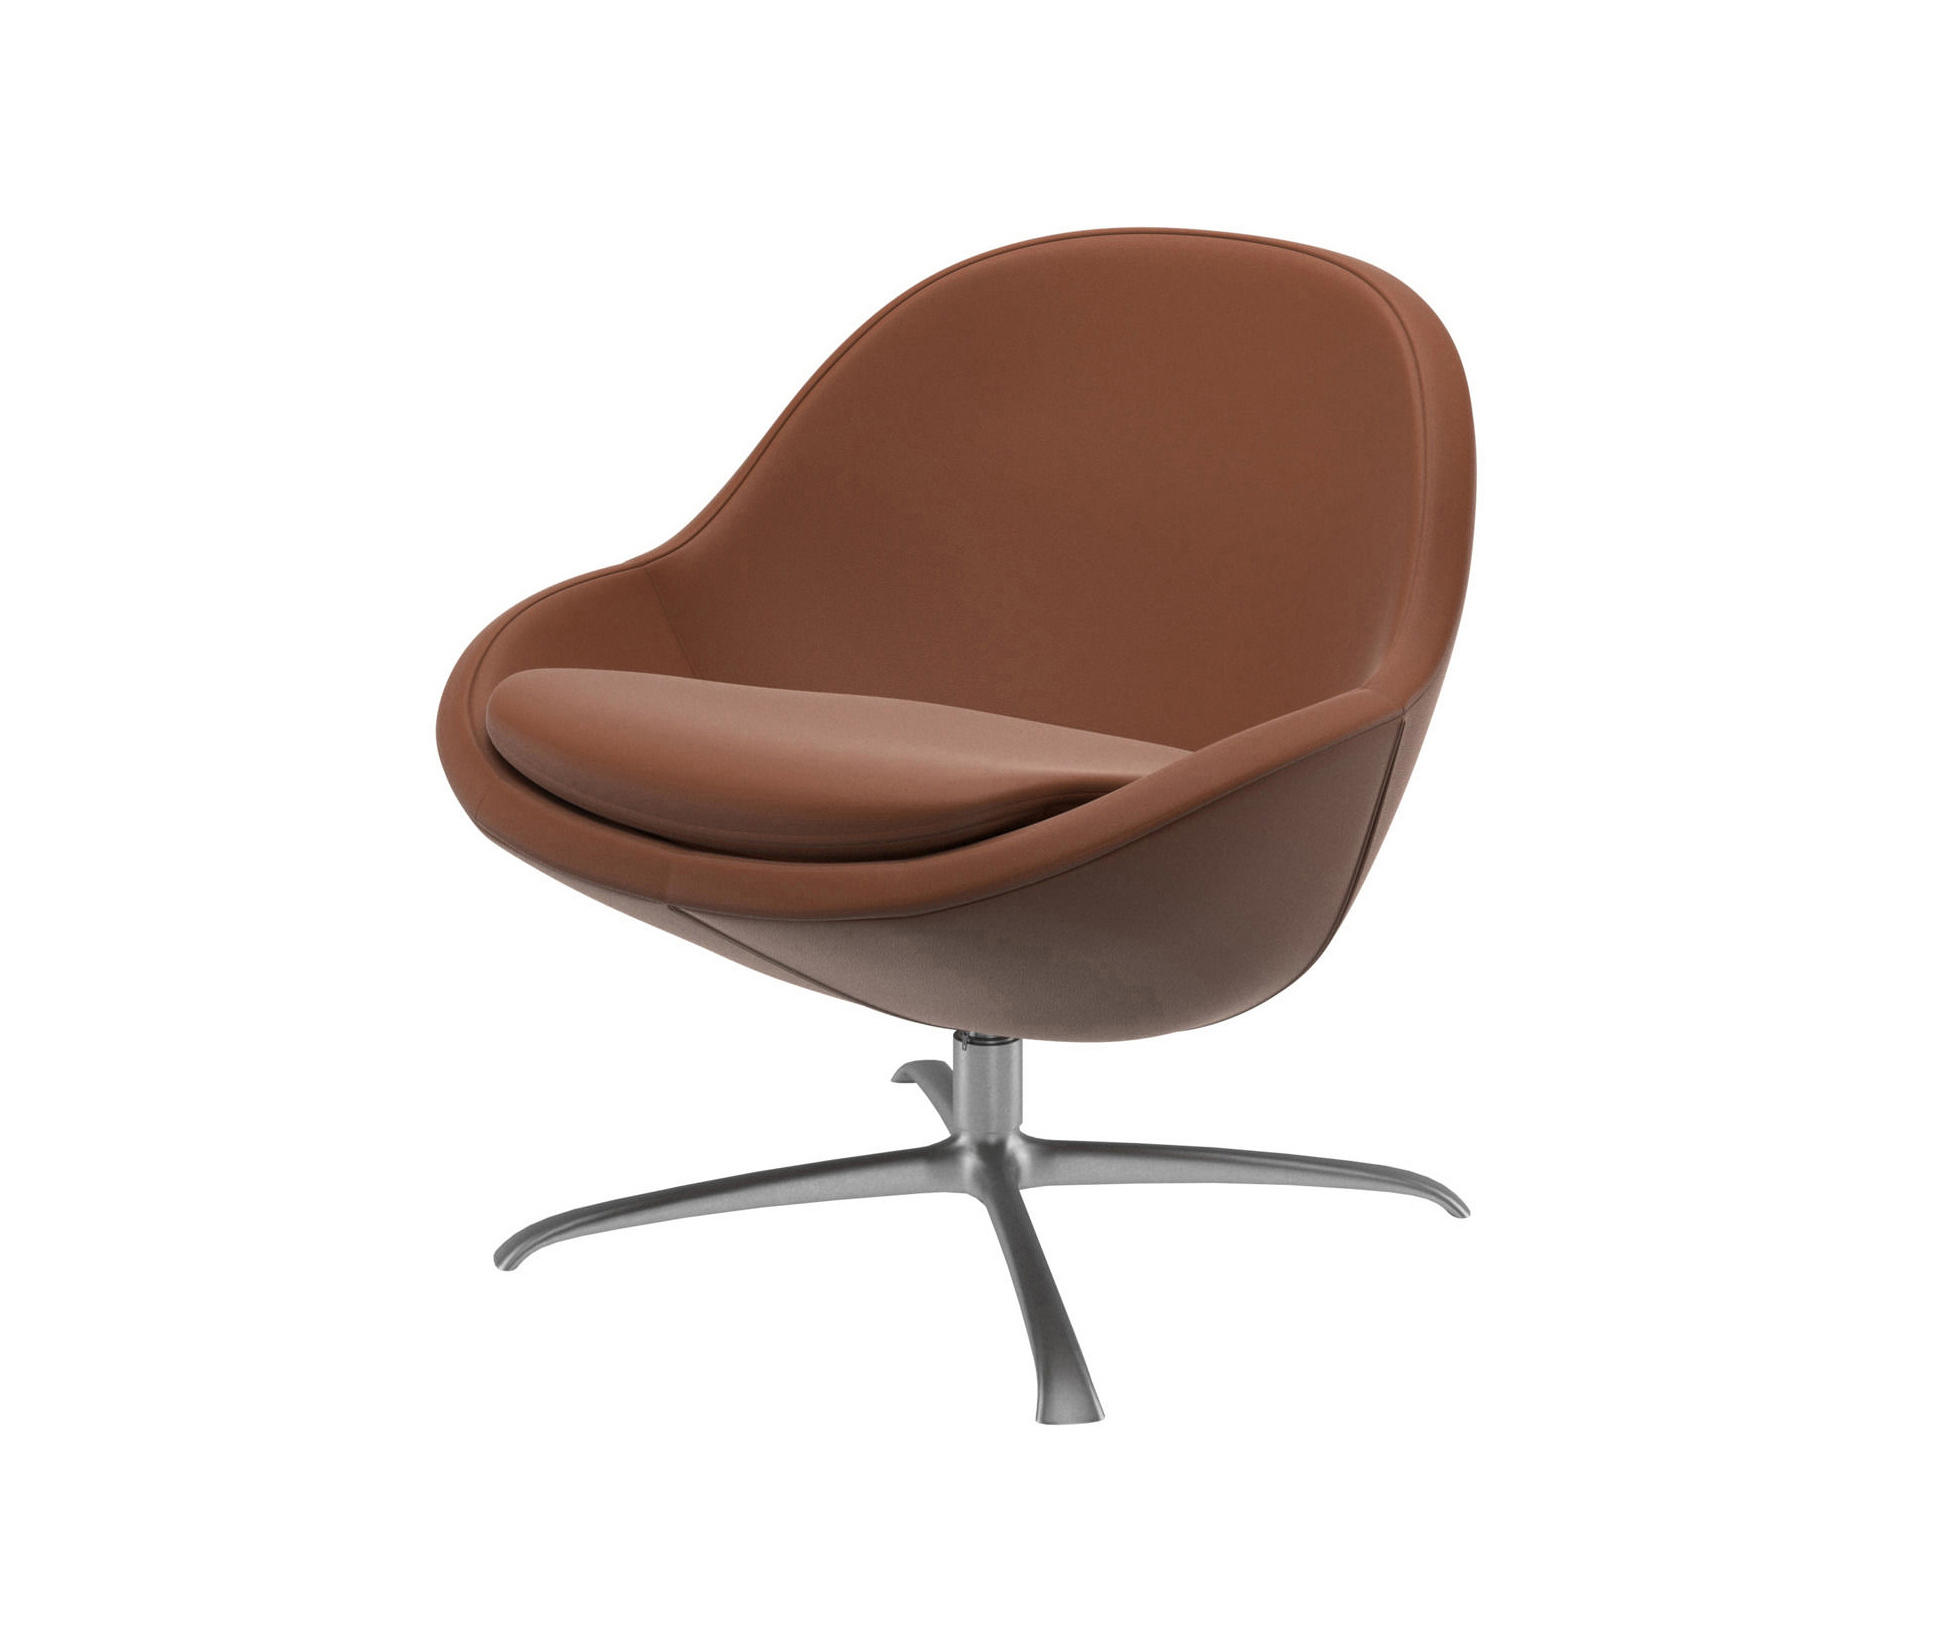 Veneto Lounge Chair 0012 With Swivel Function Architonic